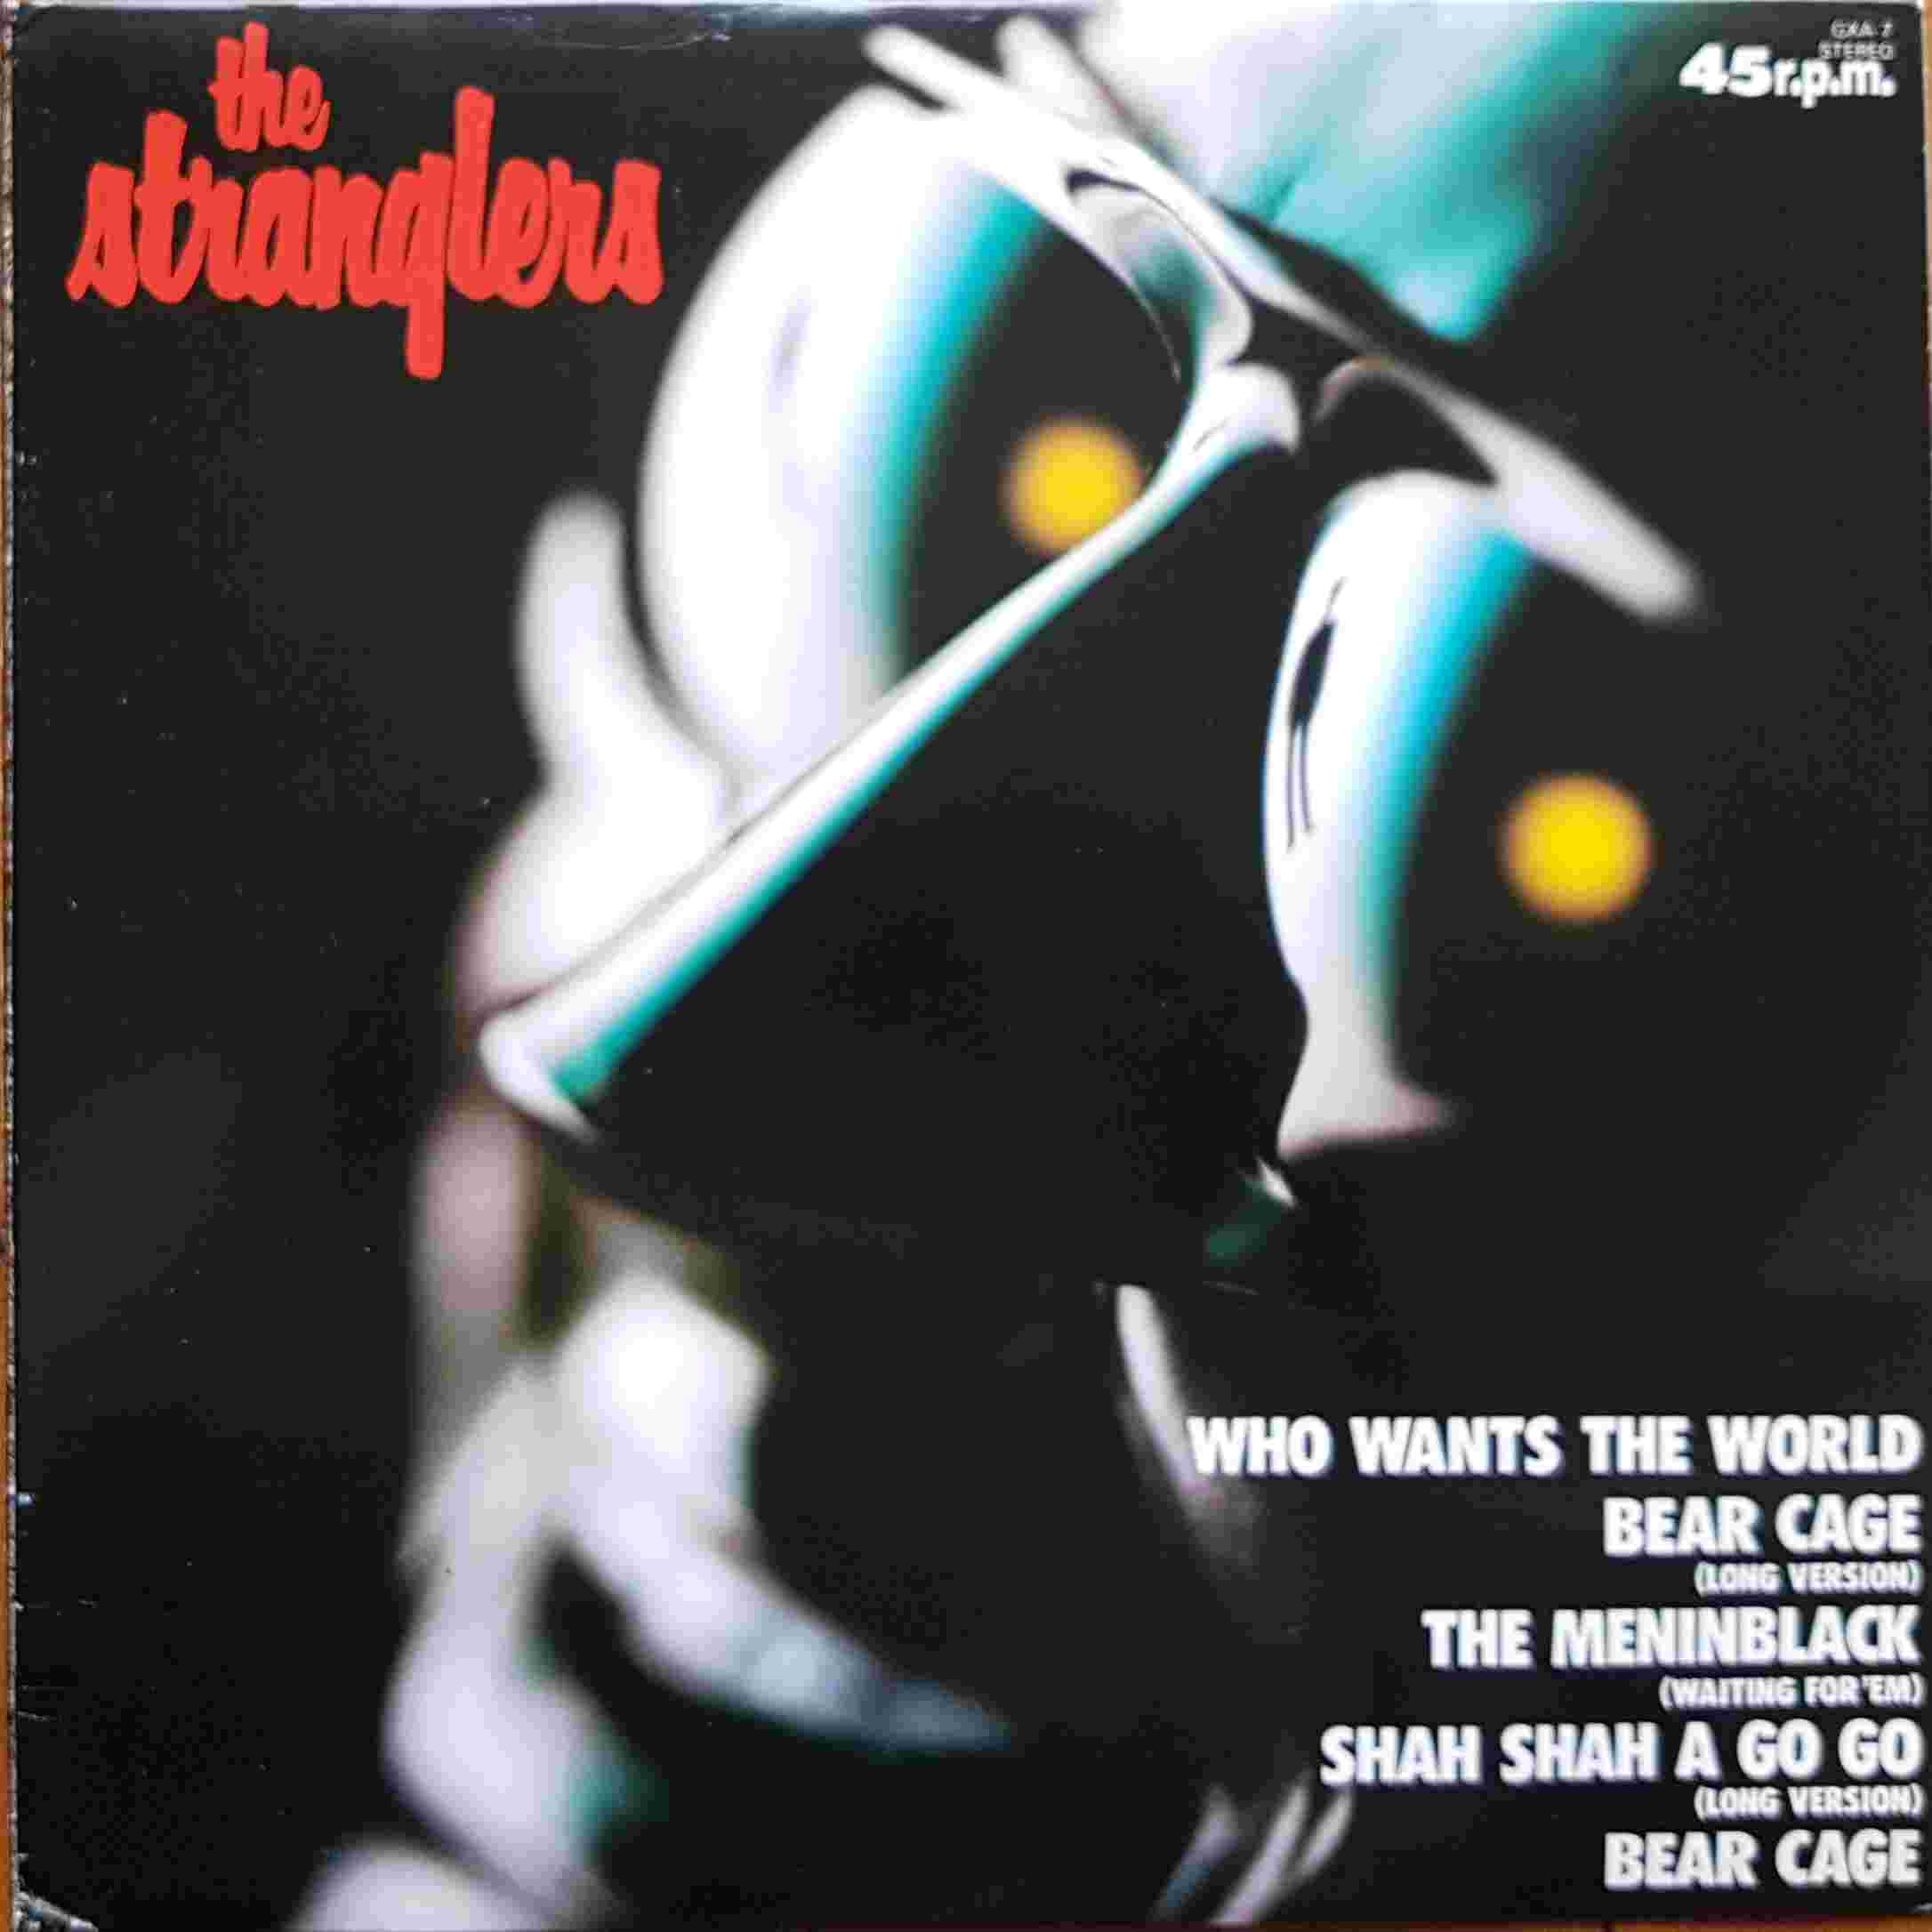 Picture of Who wants the World ? by artist The Stranglers from The Stranglers 12inches